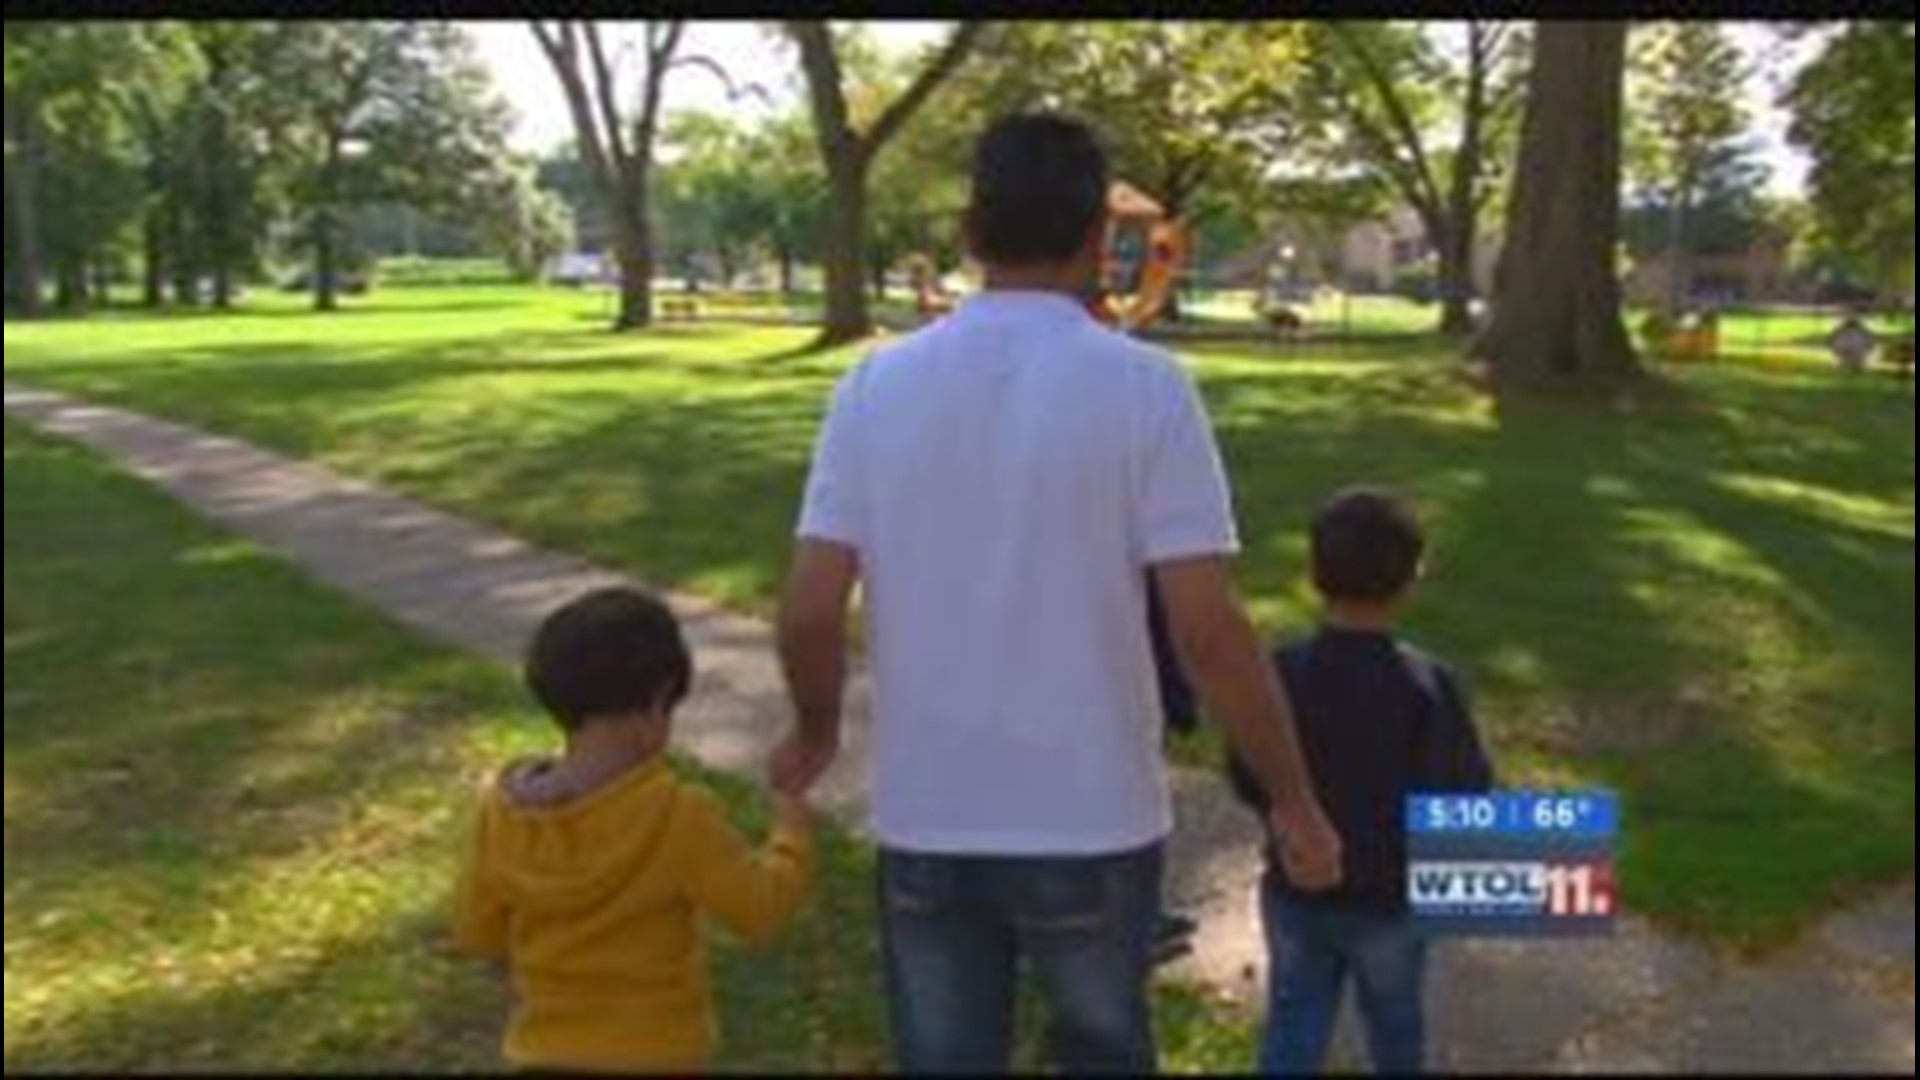 Recent Syrian refugees settle in Toledo